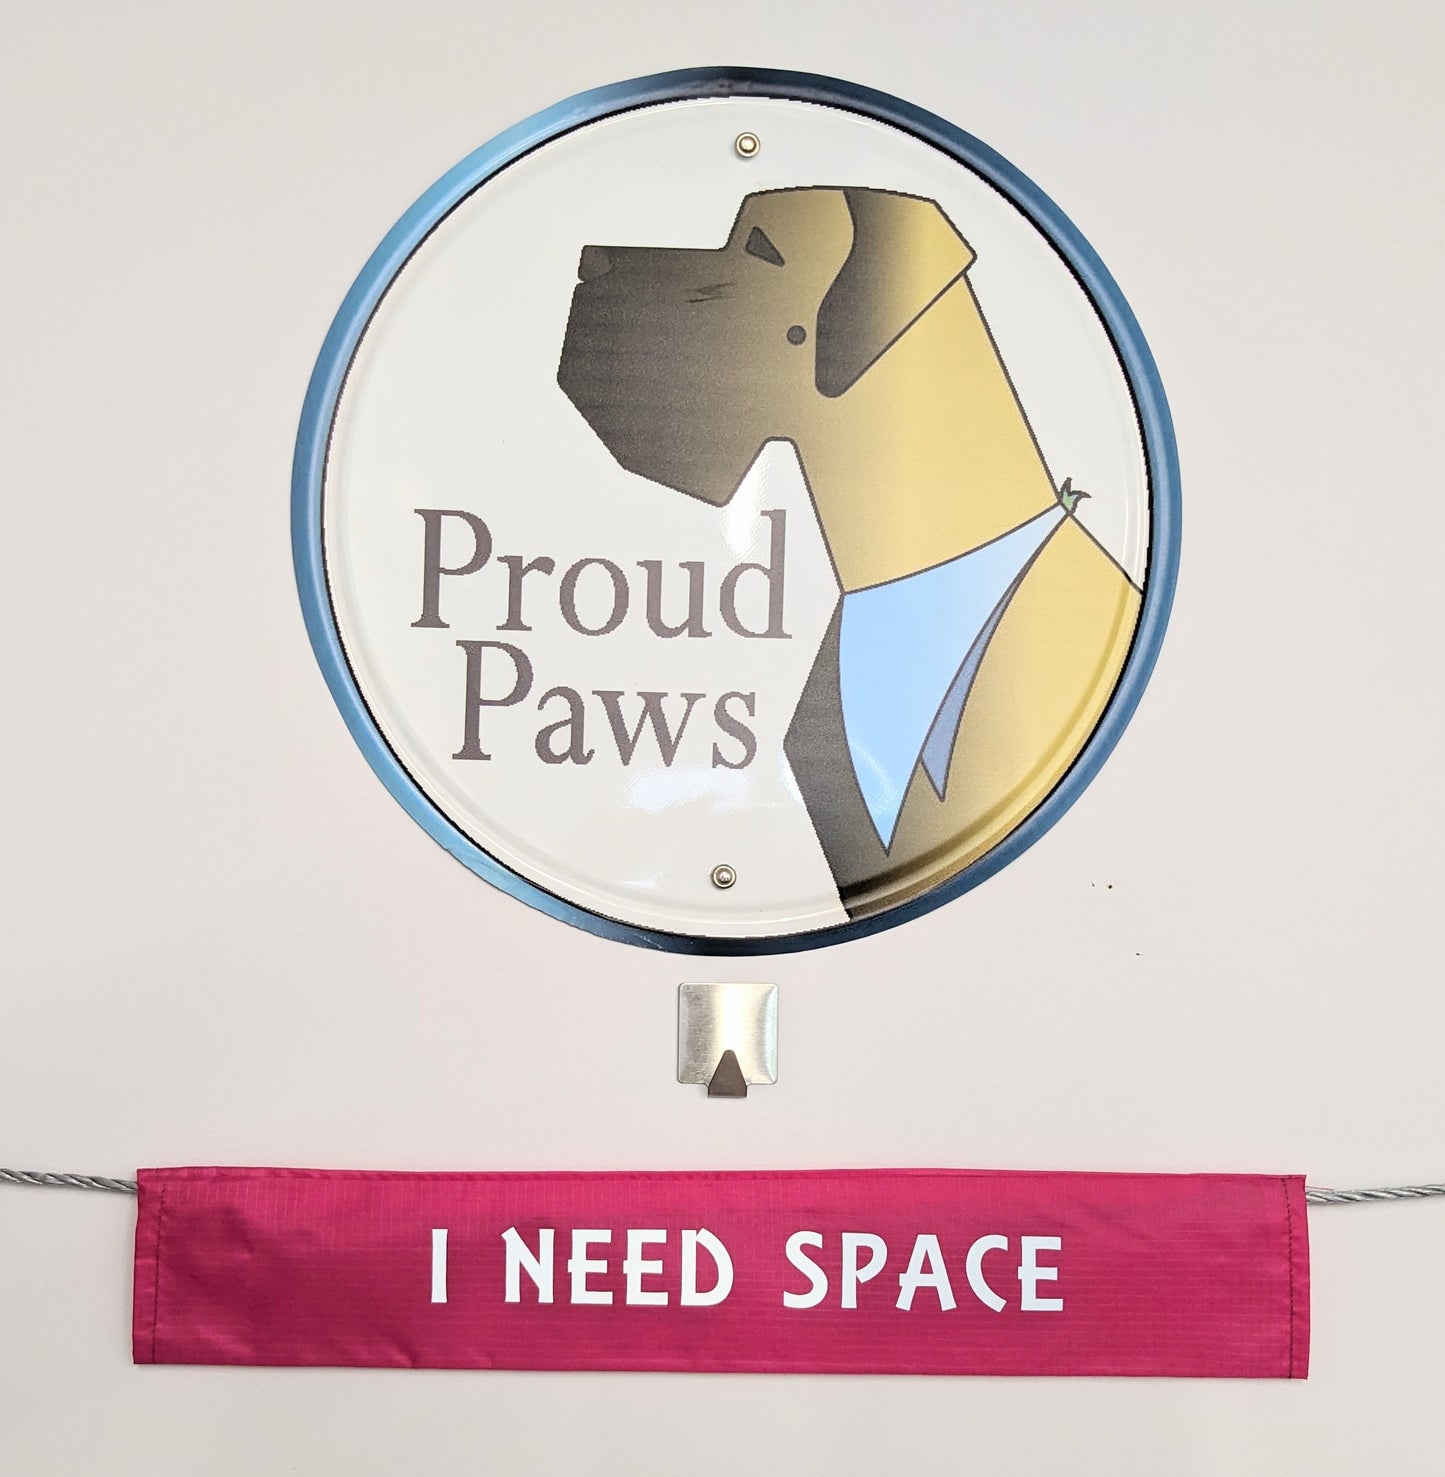 "I need space" deep pink Dog lead sleeve / cover for dog leash - canine training - puppy socialising - reactive dog - support dog